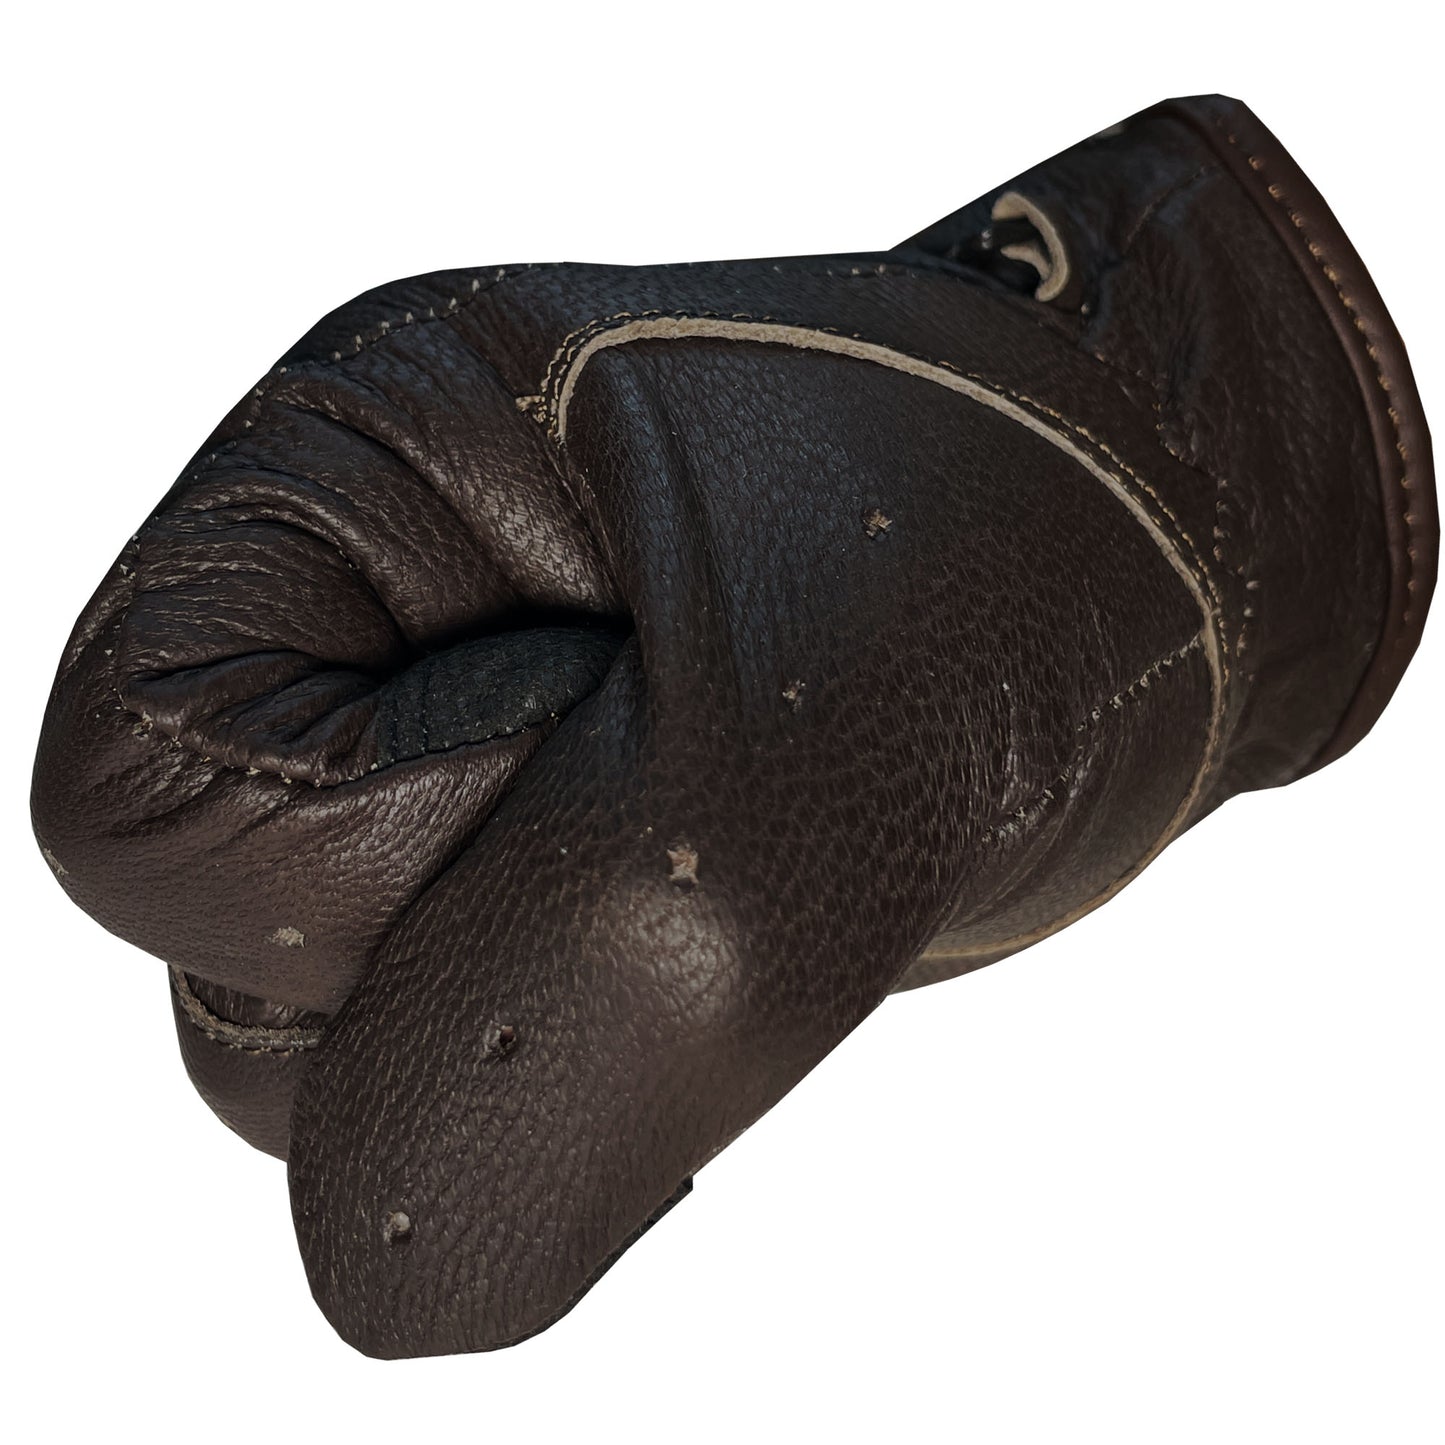 New Biker Police Leather Motorcycle Riding Ventilation Driving Gloves Brown